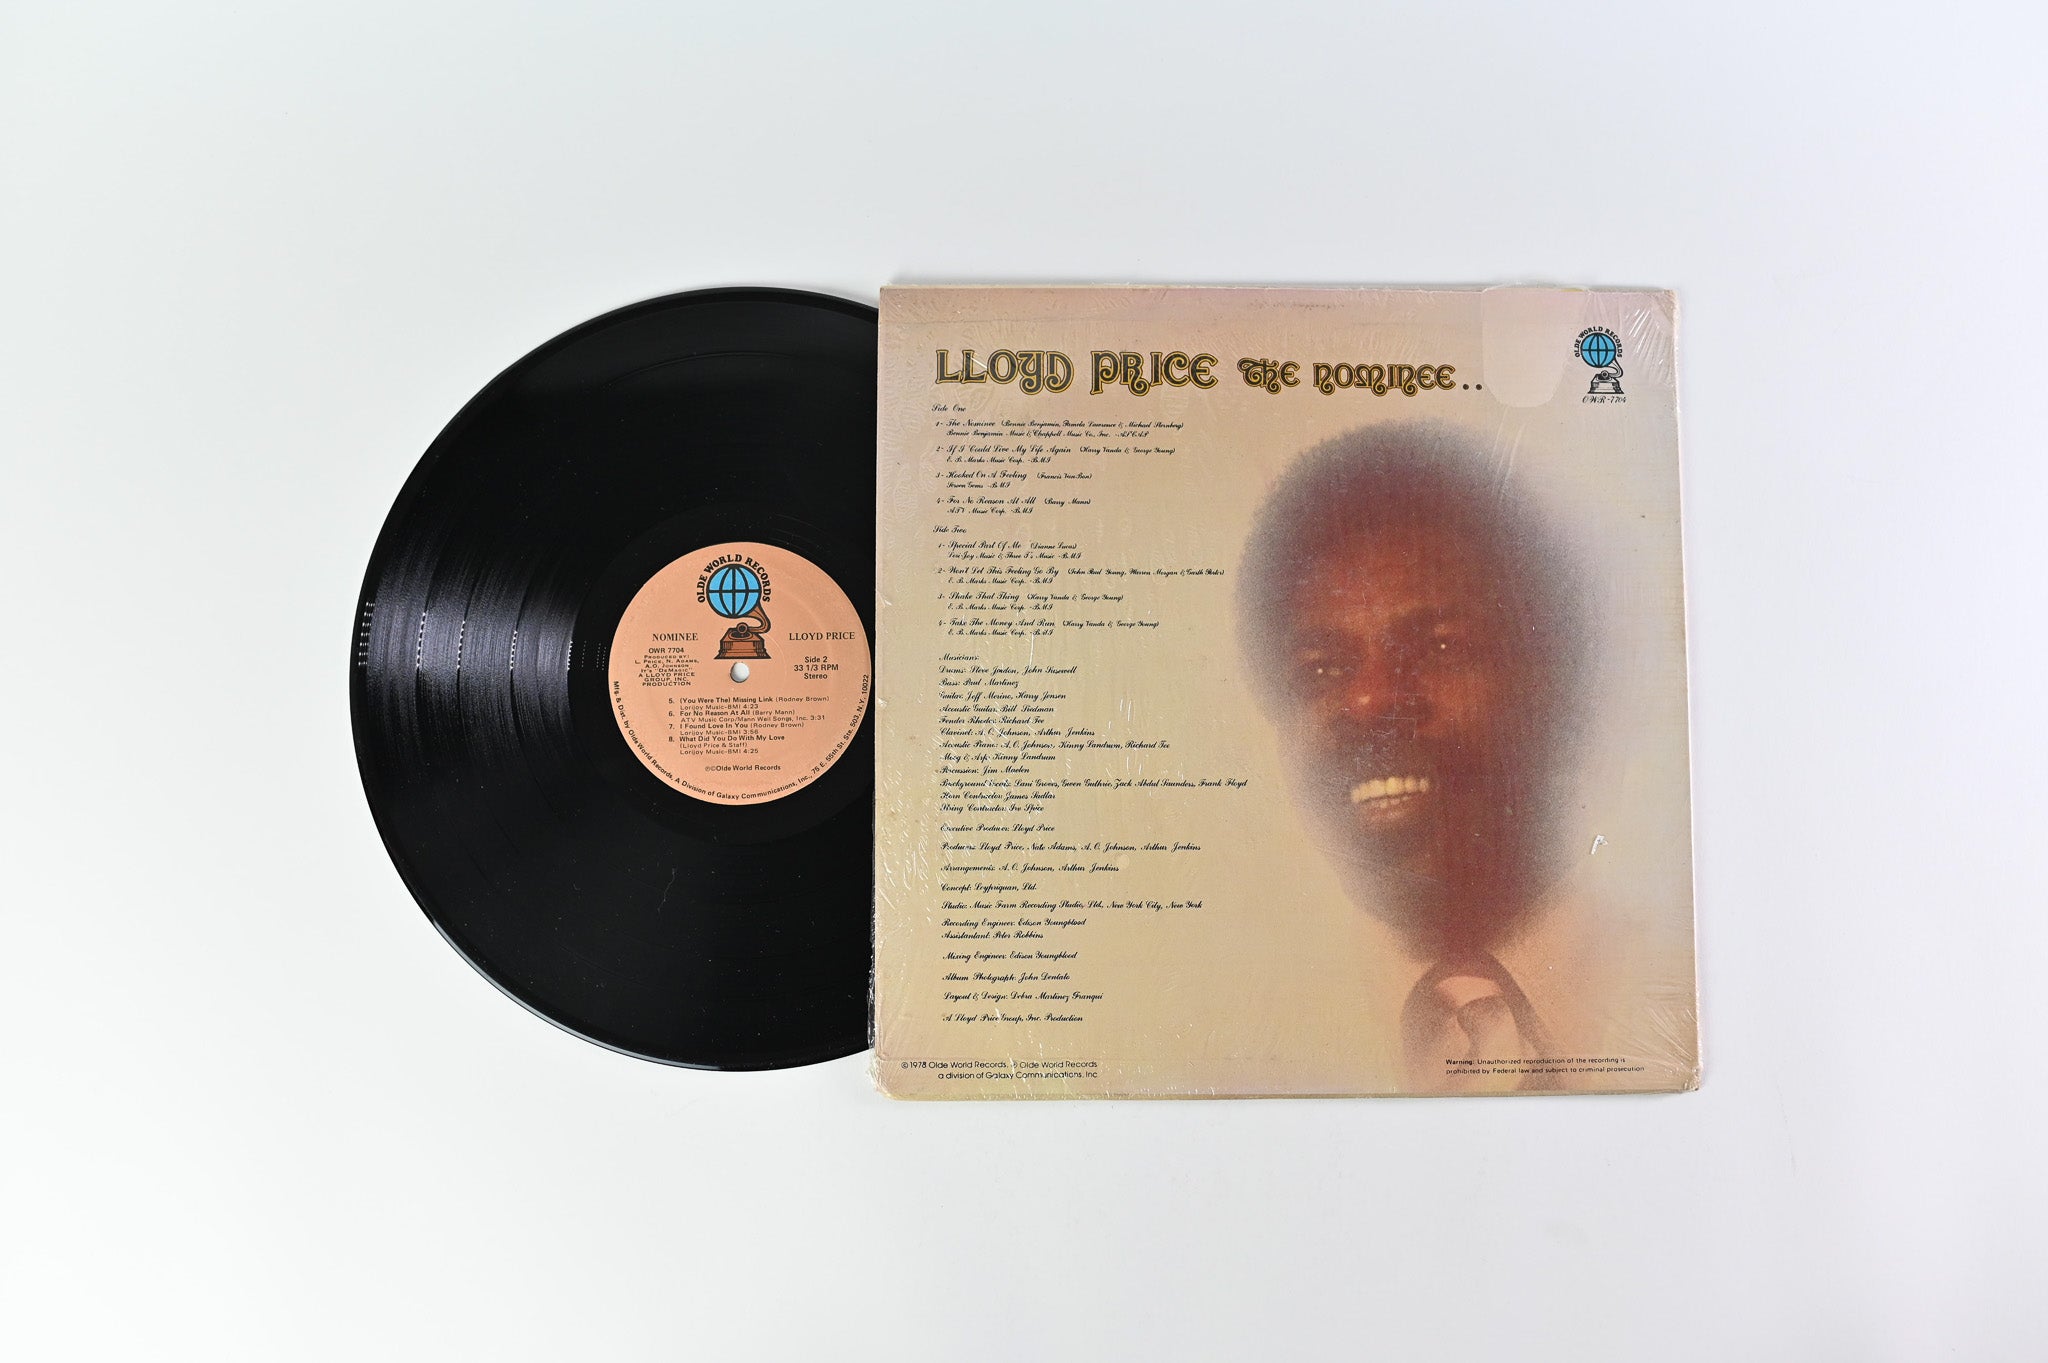 LLoyd Price - The Nominee on Olde World Records